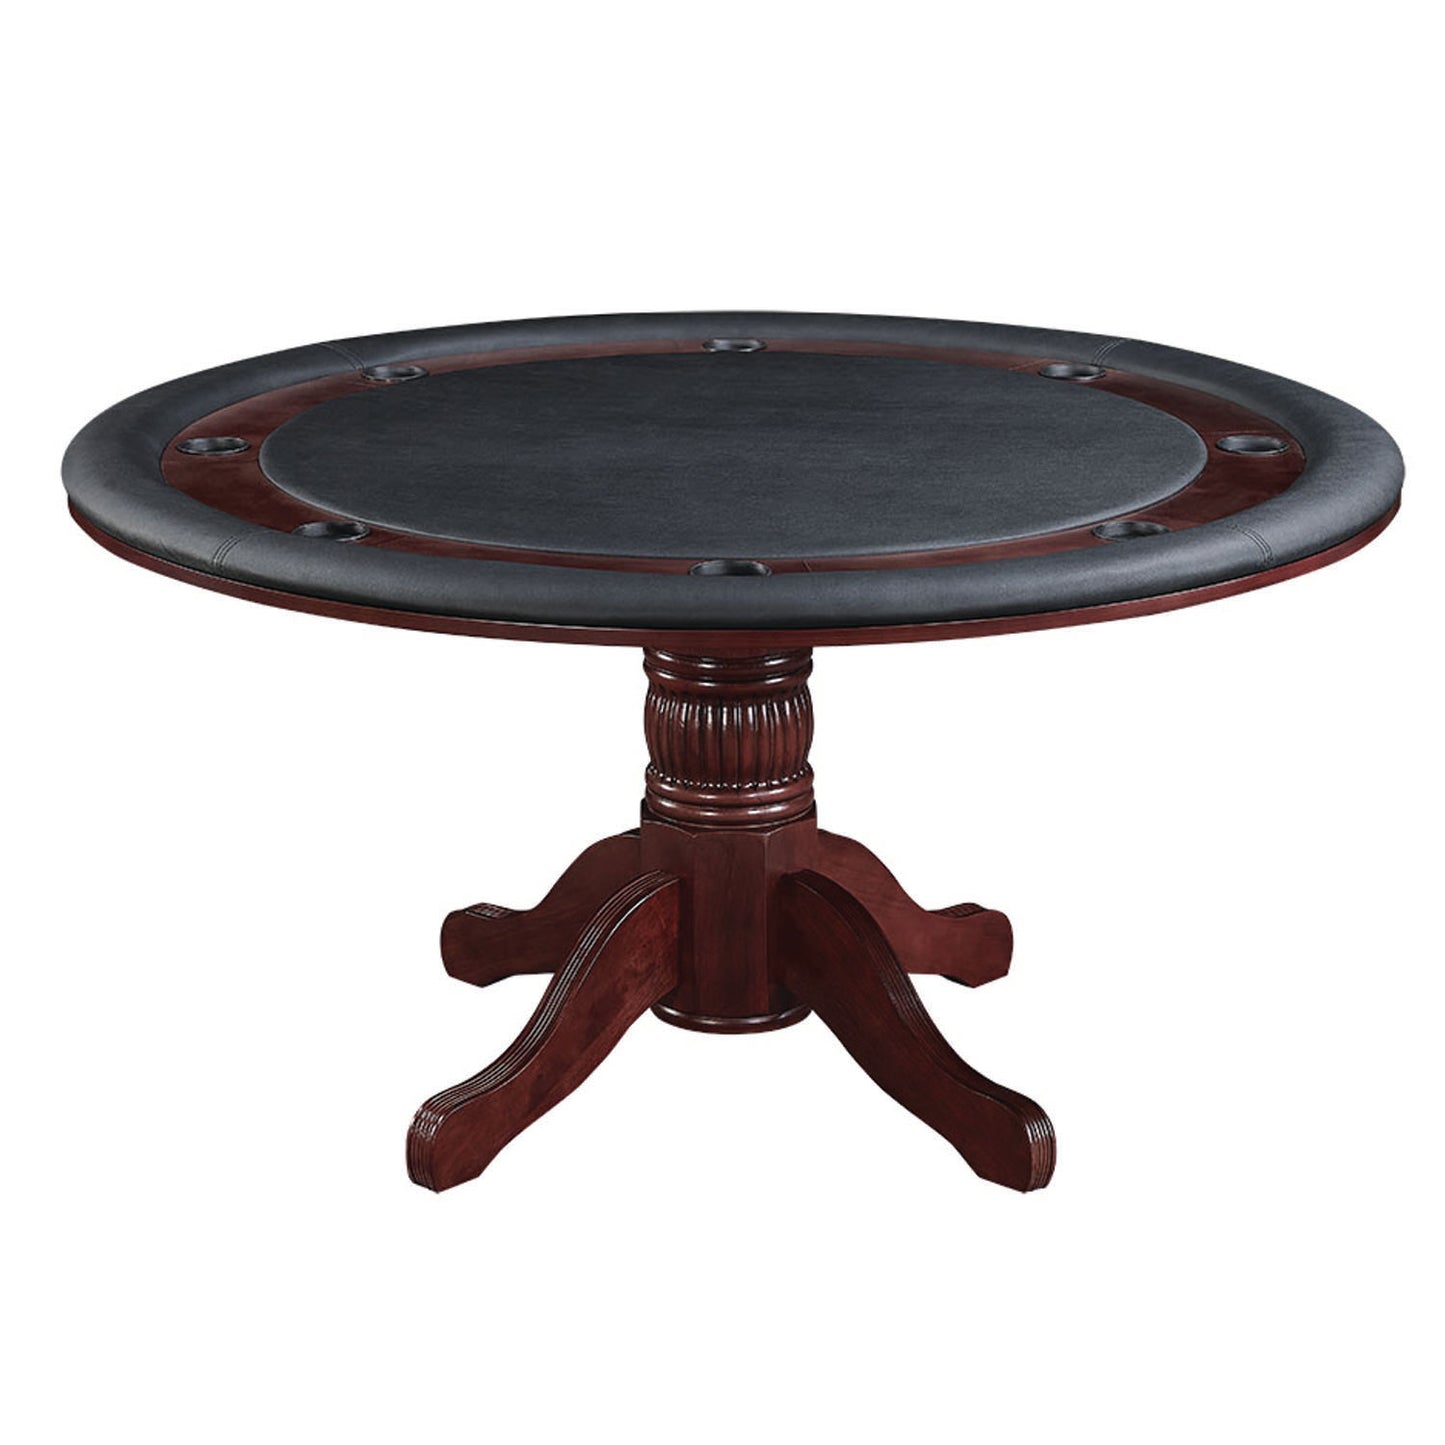 60" reversible round game table with vinyl padded game surface in an English tudor finish.